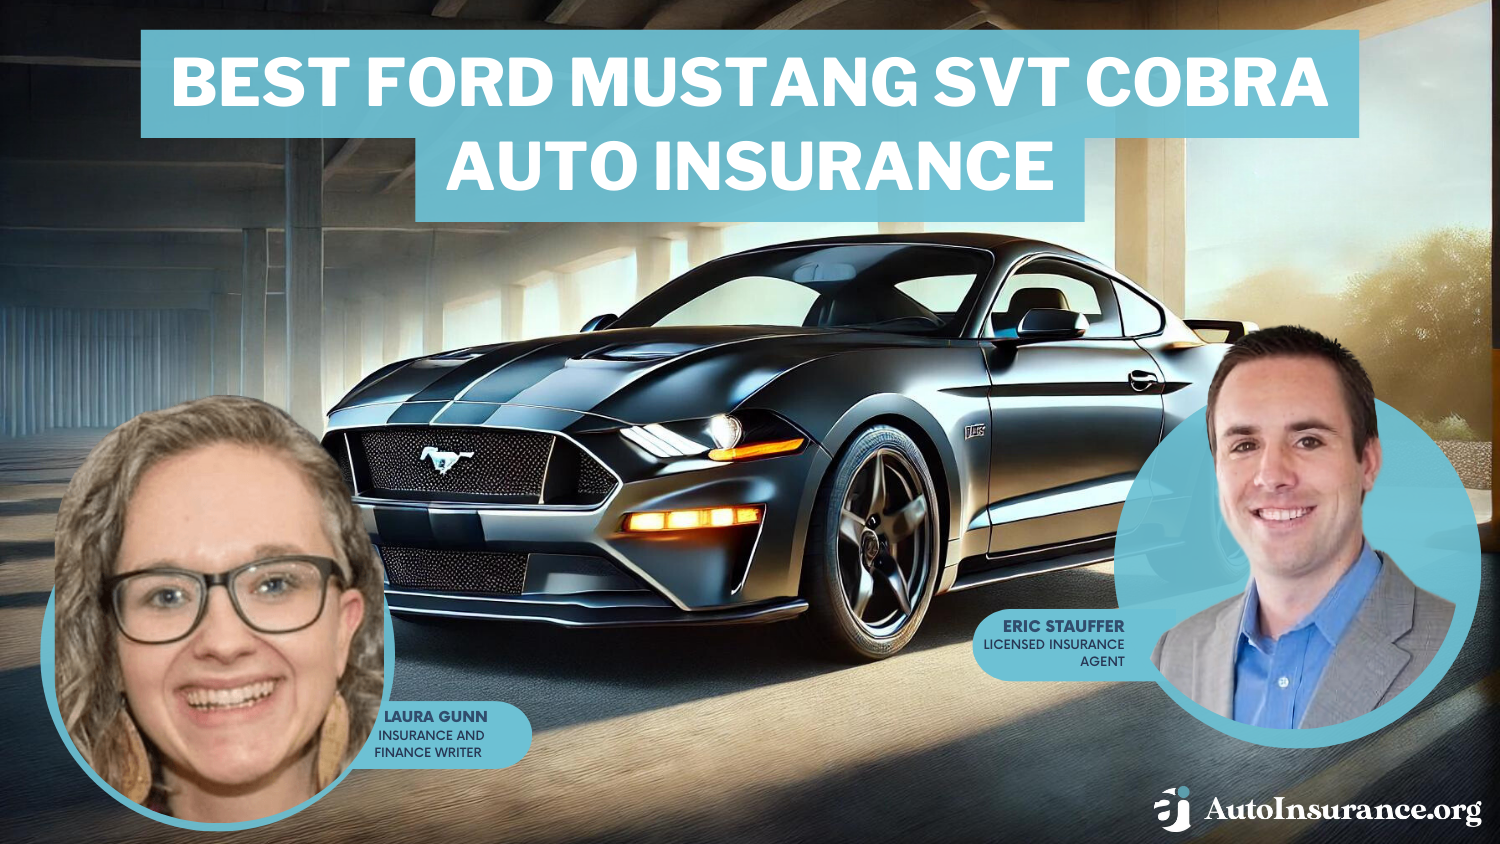 Best Ford Mustang SVT Cobra Auto Insurance: State Farm, Geico, and Progressive